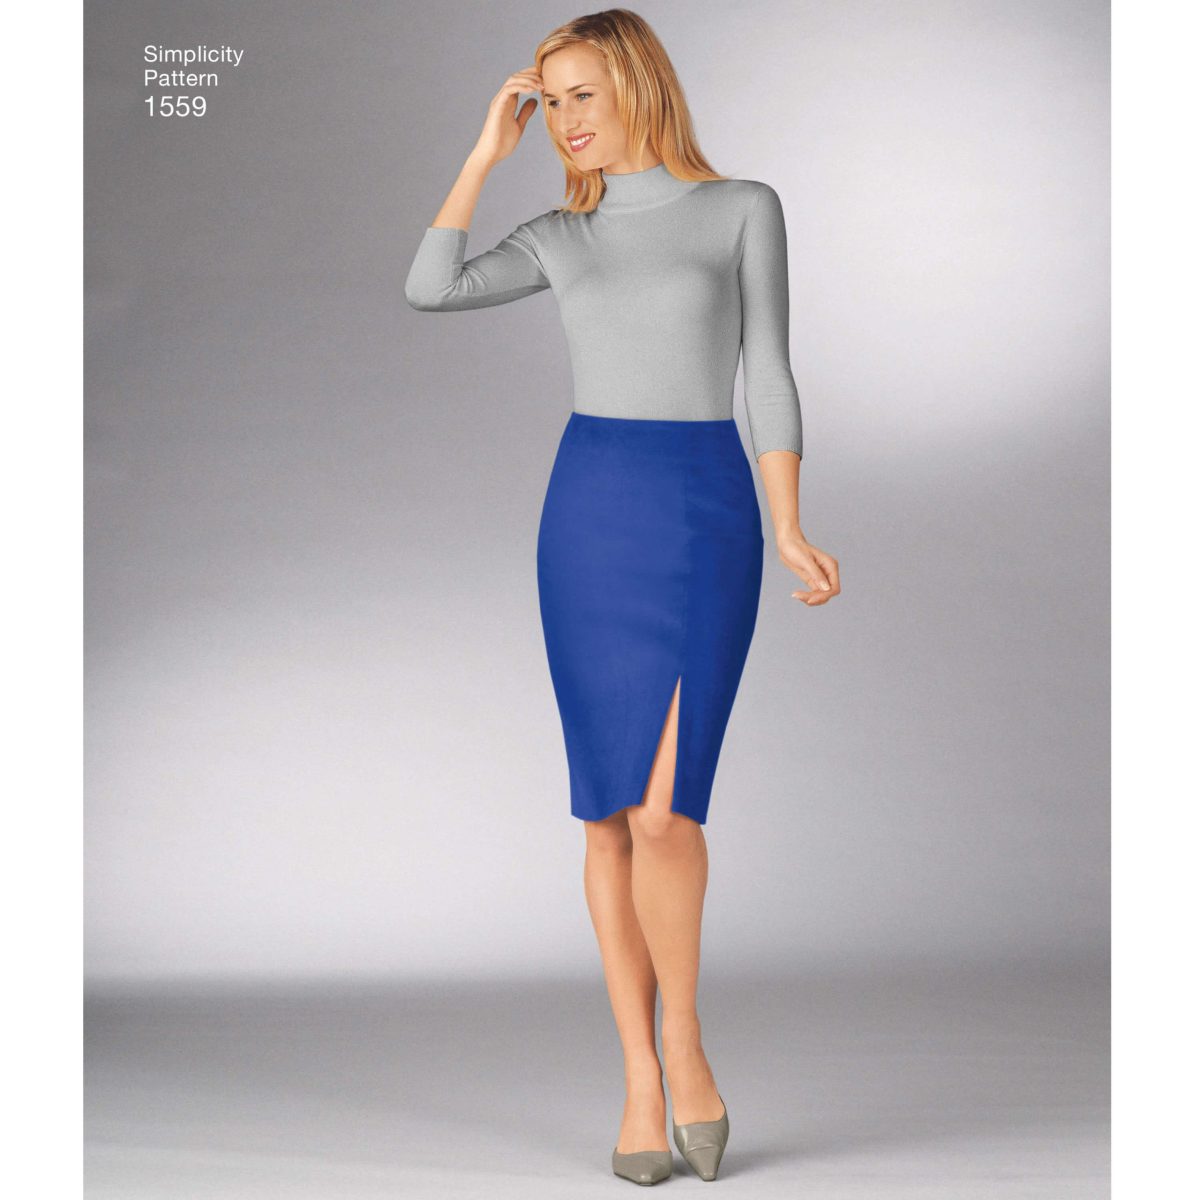 Simplicity Sewing Pattern 1559 Misses' Skirts and Trousers